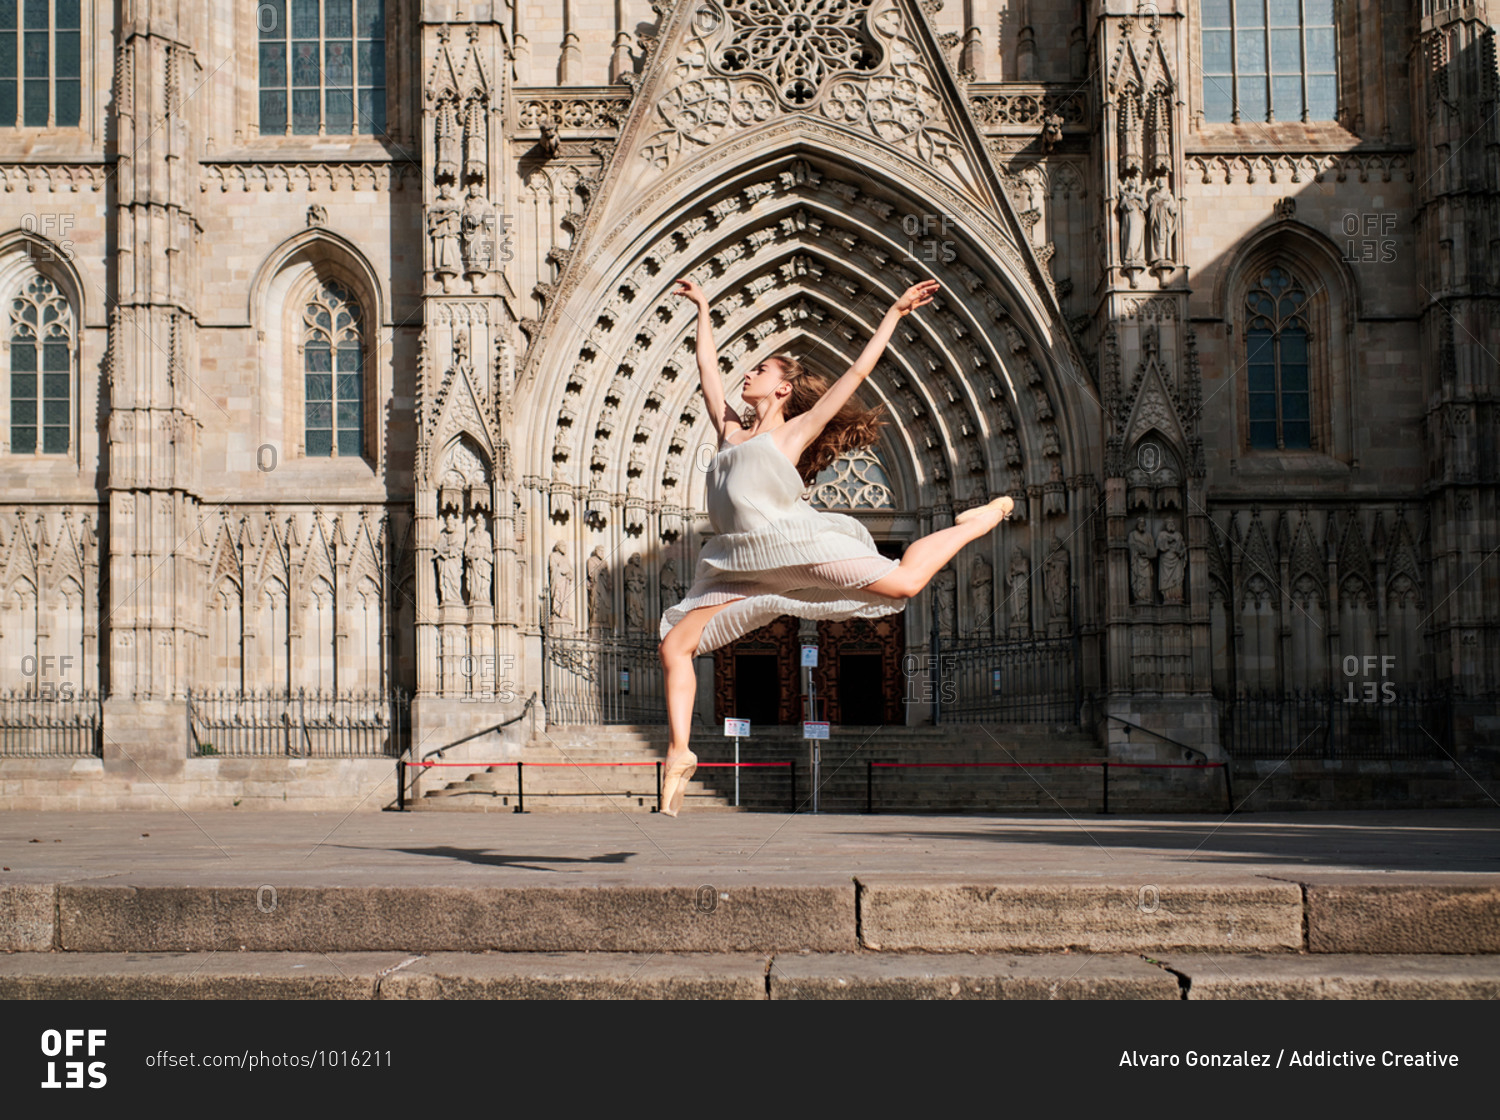 Full body of young female ballet dancer performing sensual dance moves and jumping with arms raised against ornamental stone building with Gothic architecture